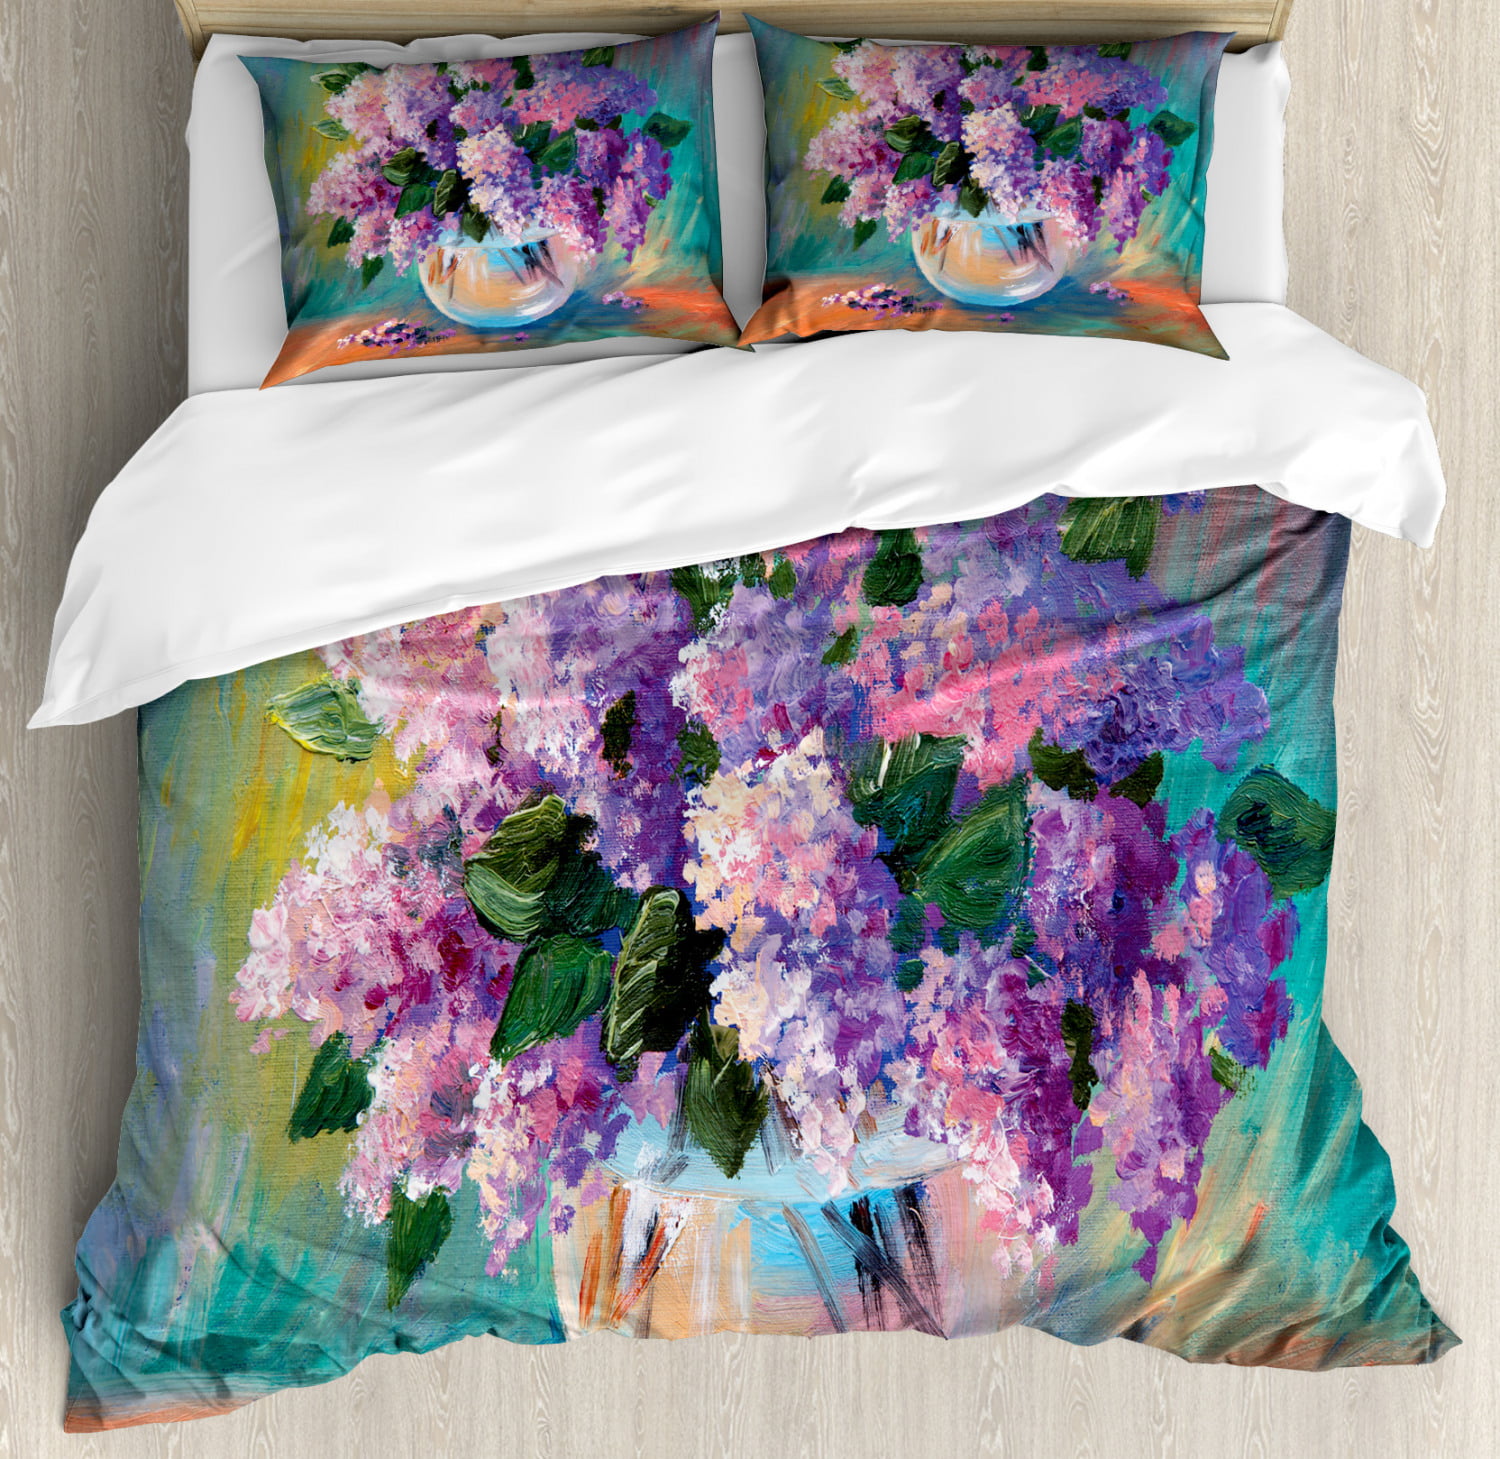 Lilac King Size Duvet Cover Set Oil Painting Style Freshly Picked